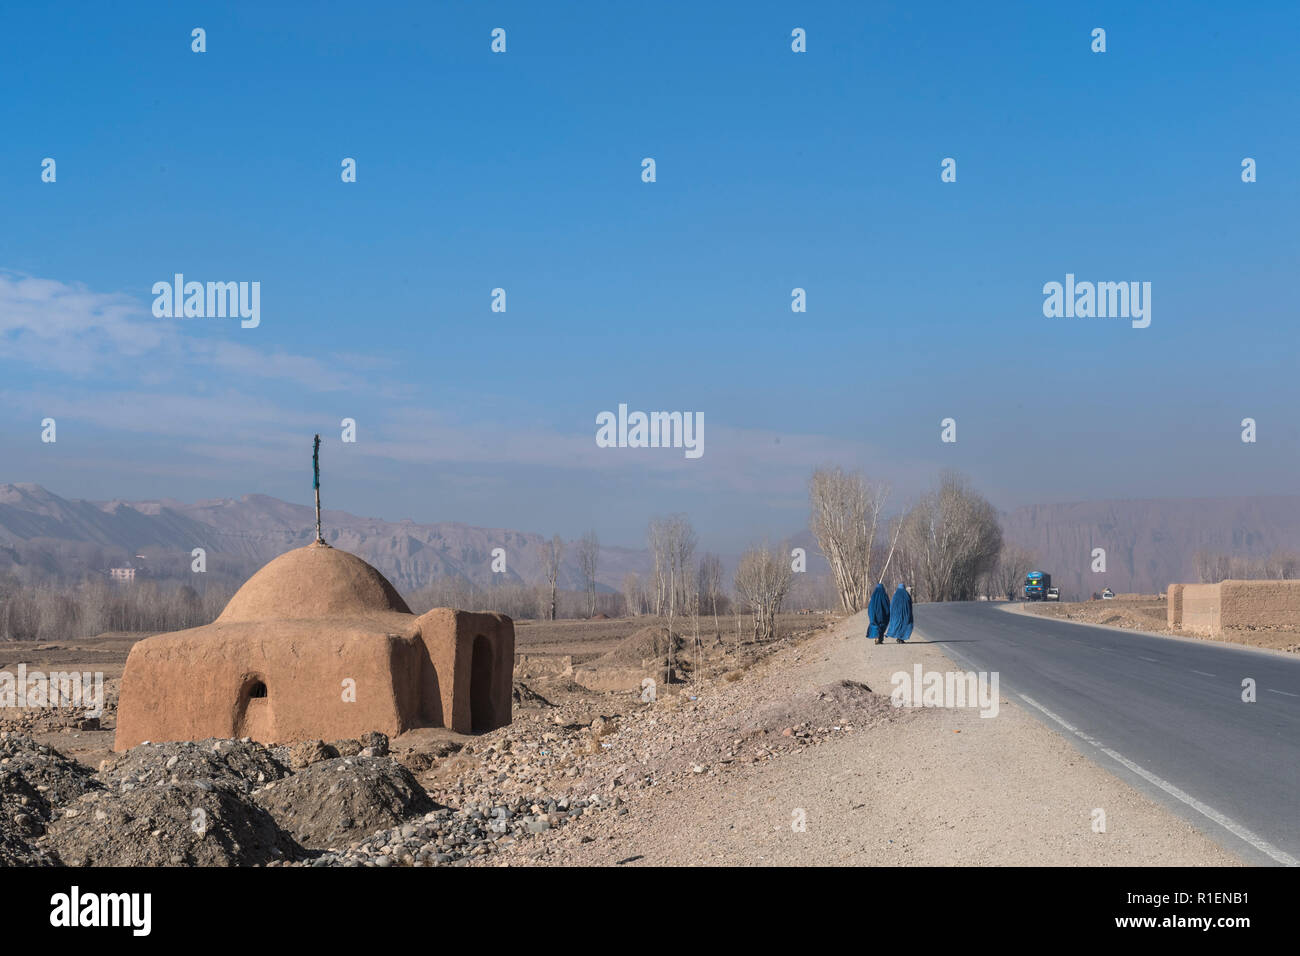 2 Ladies Wearing Blue Burqa Walking On Road Entering The Bamyan Valley With A Shrine And Mountains In The Background, Bamyan Province, Afghanistan Stock Photo